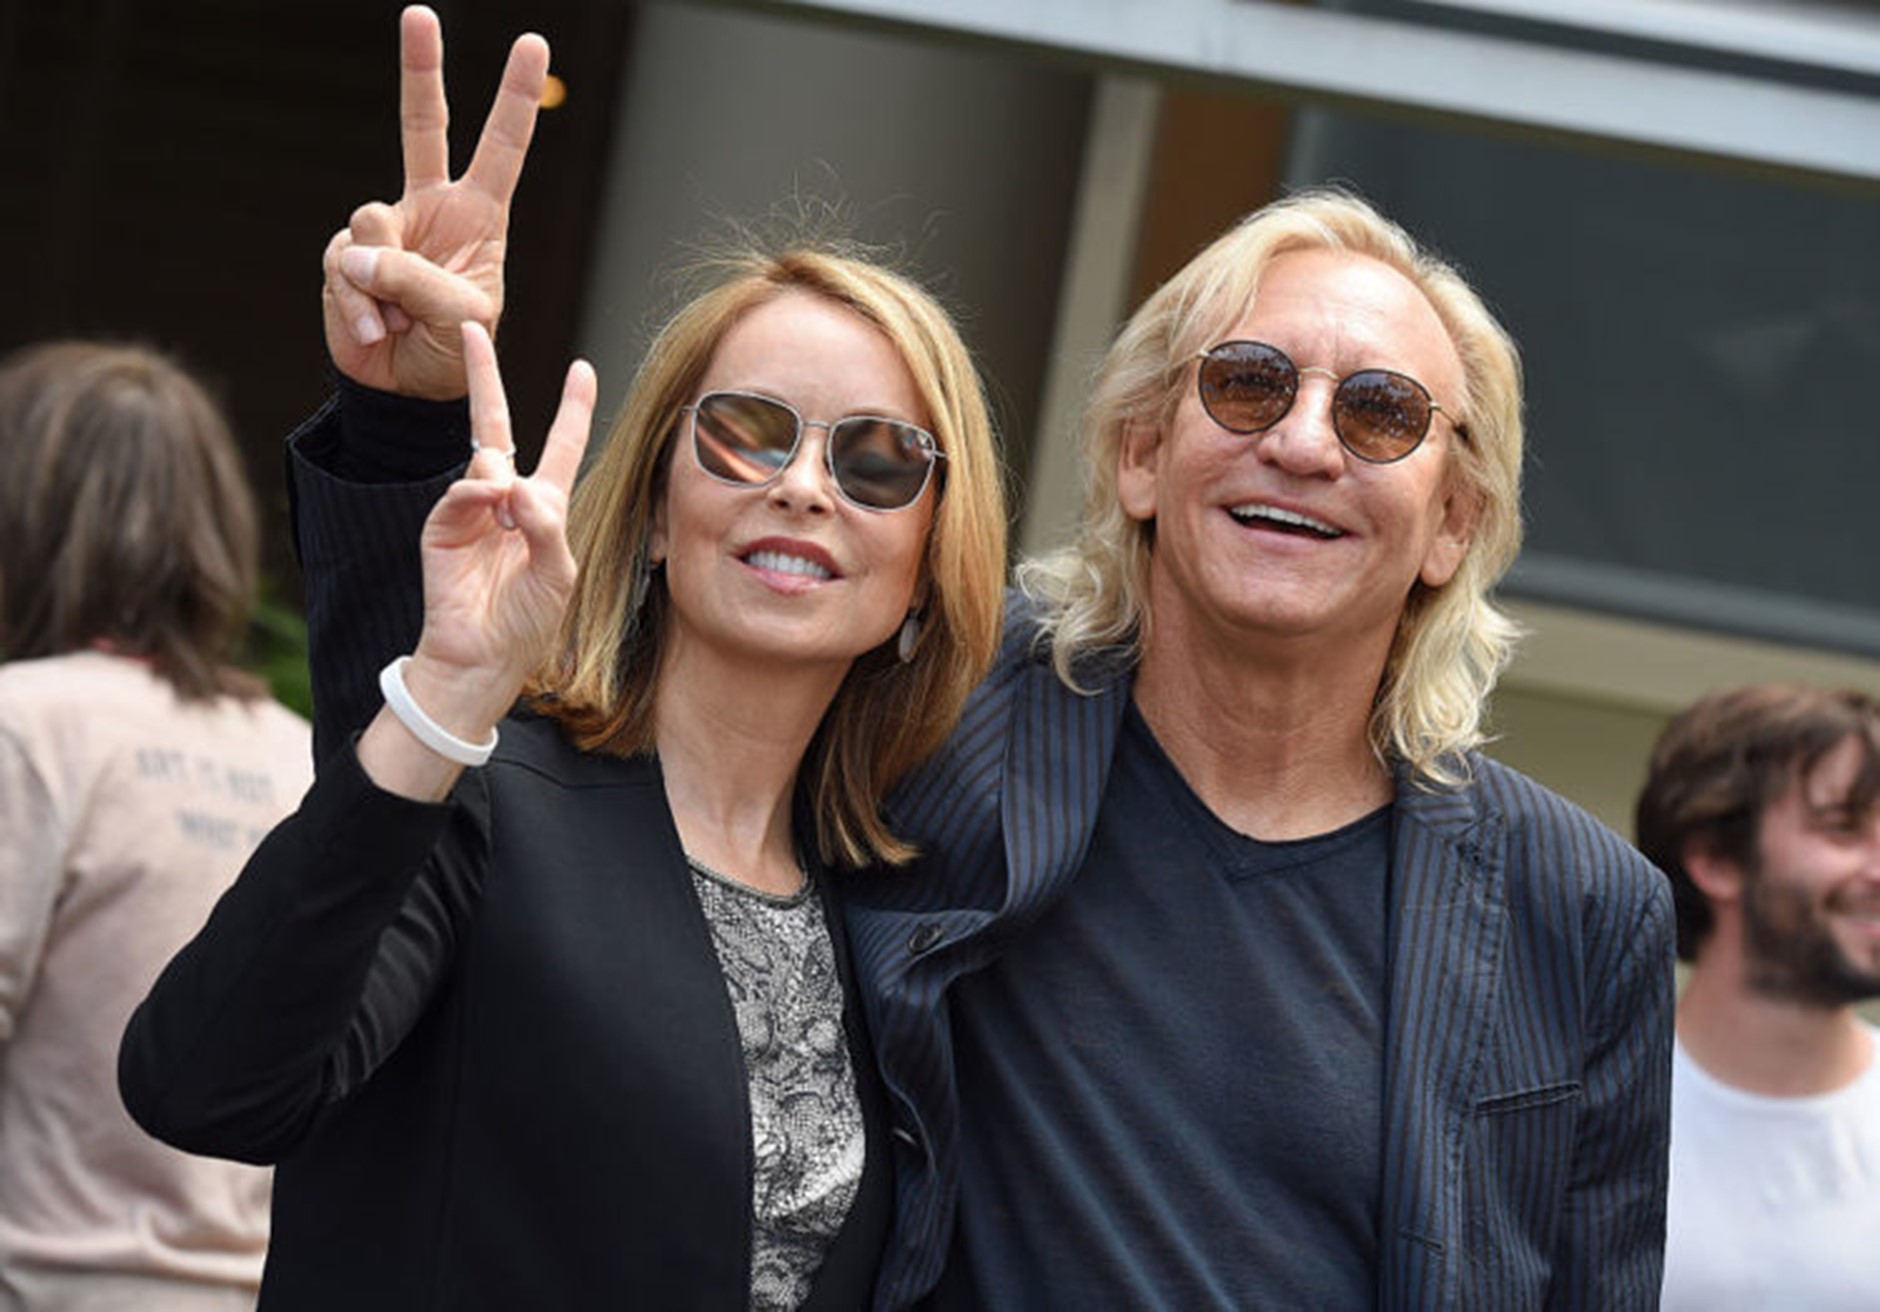 Joe Walsh Spouse: With current wife Marjorie Bach.